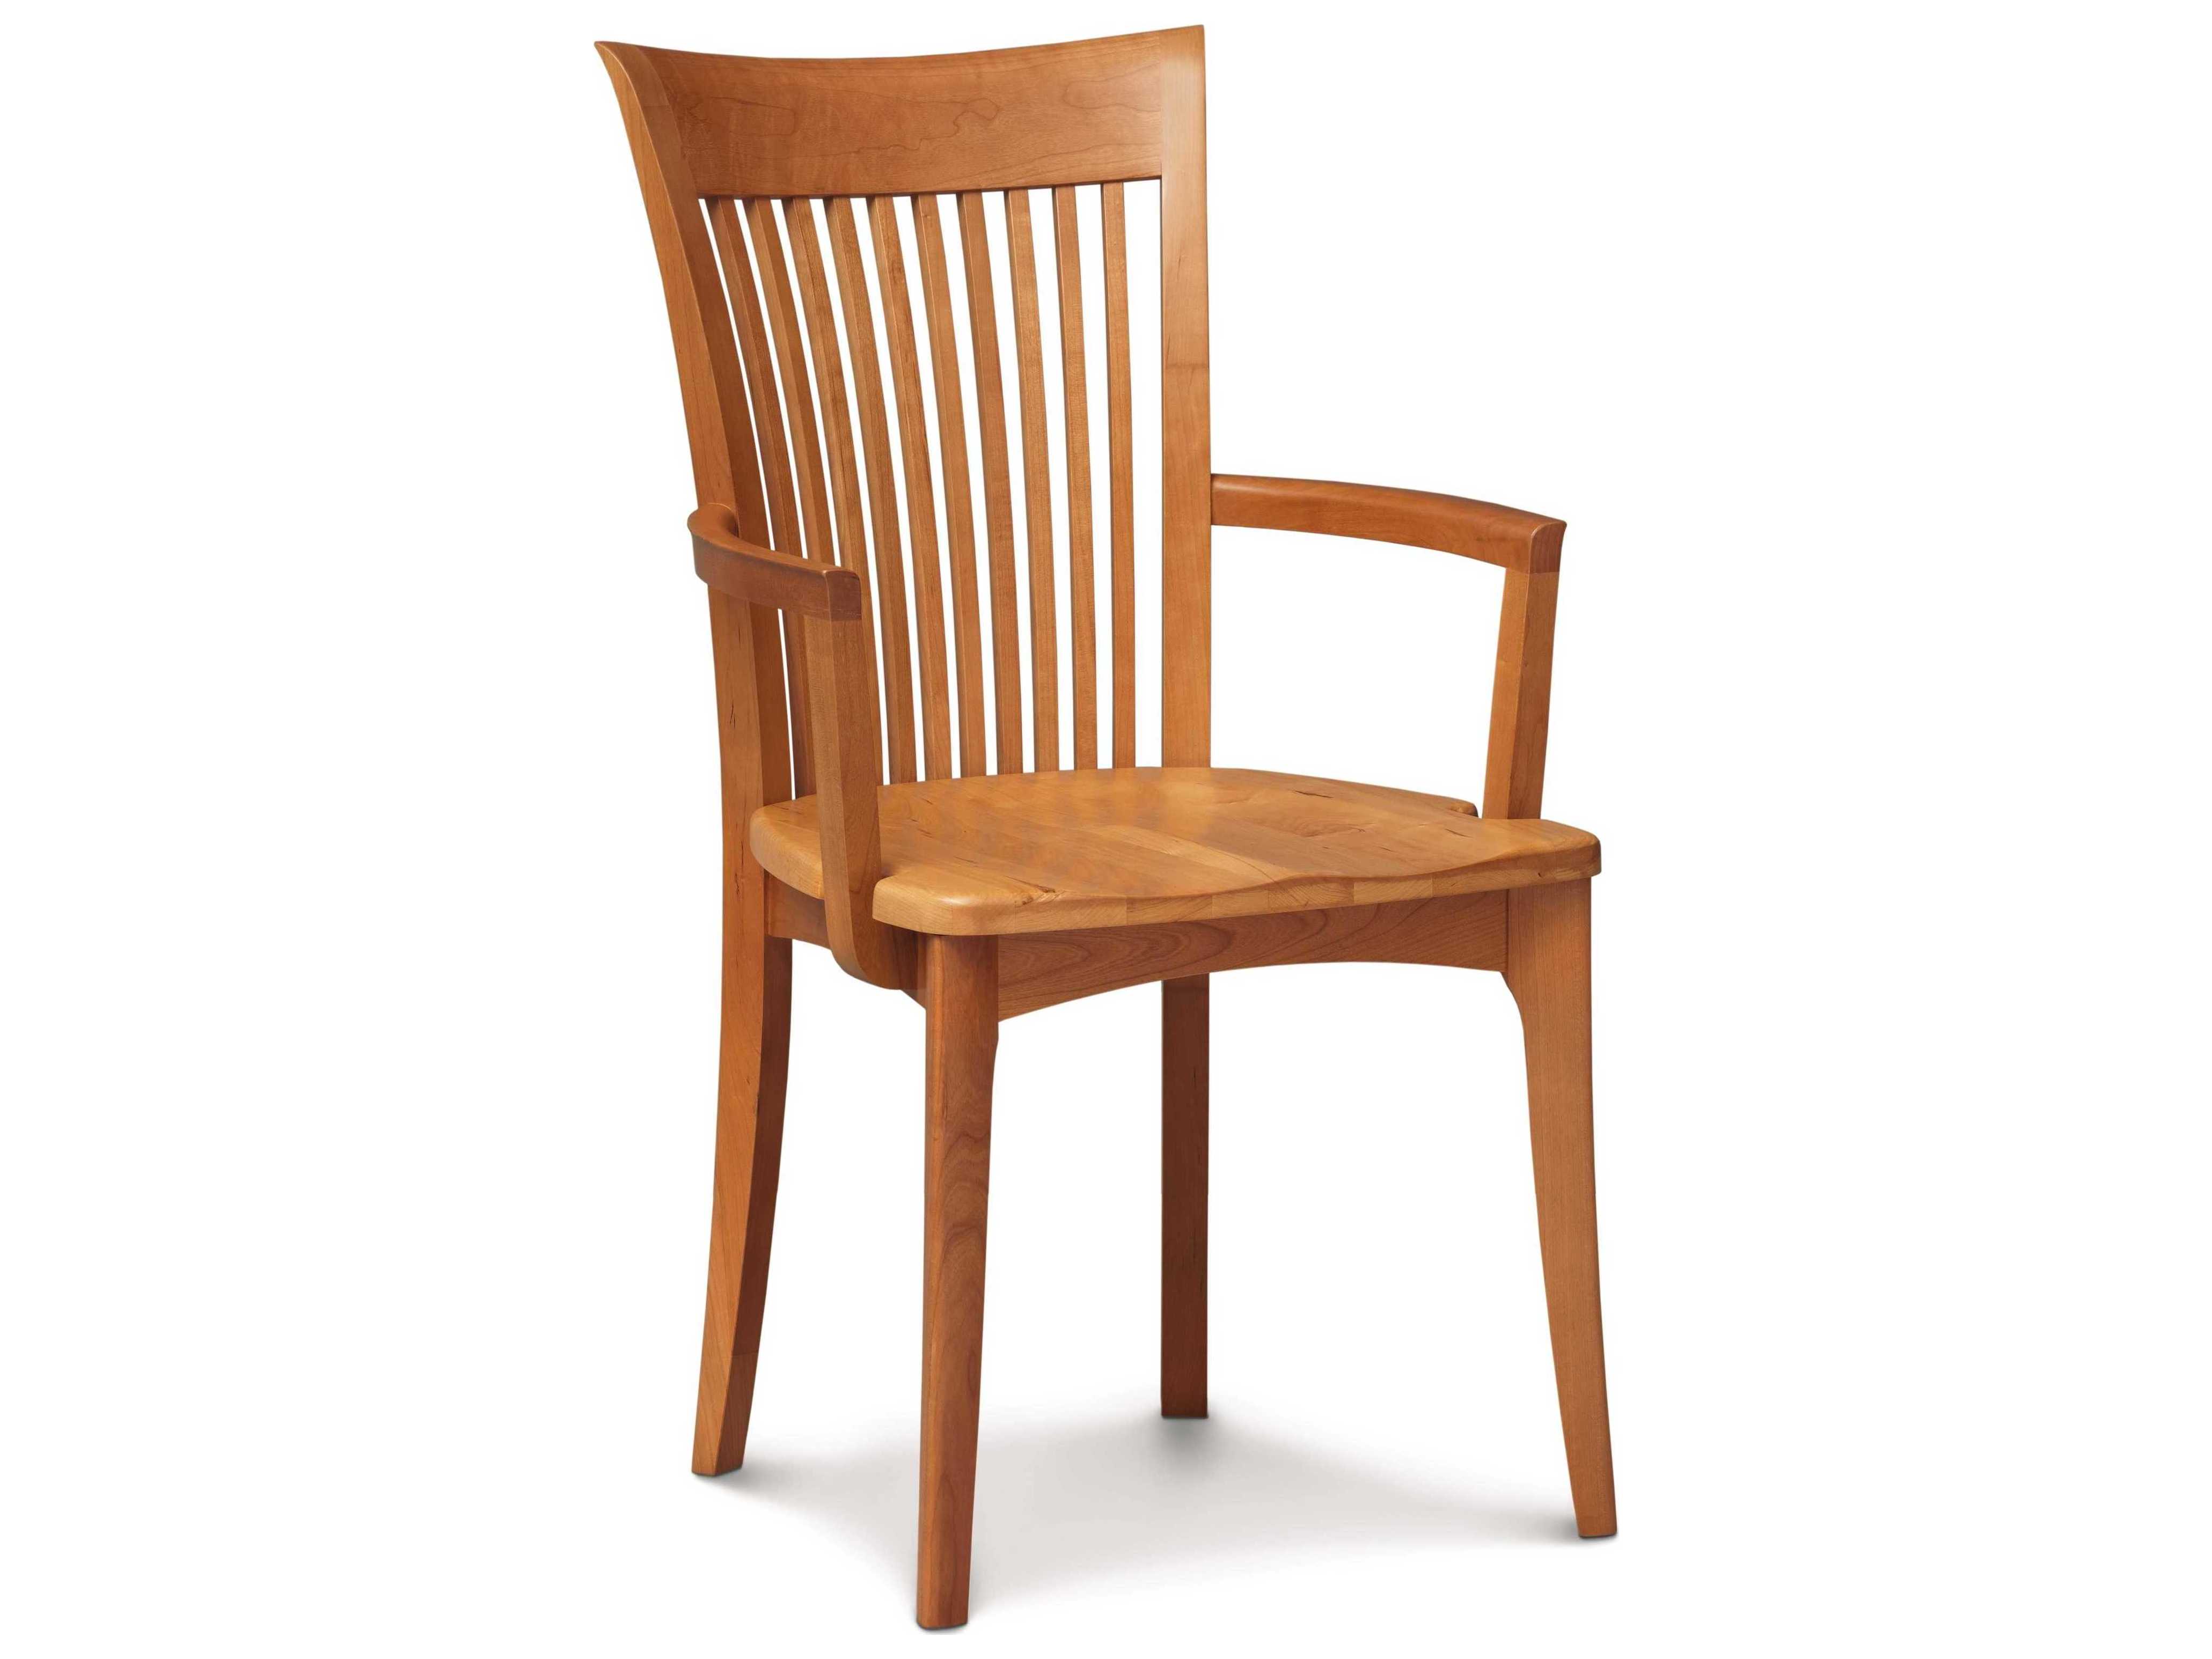 Dining Room Chair With Arms Codycross